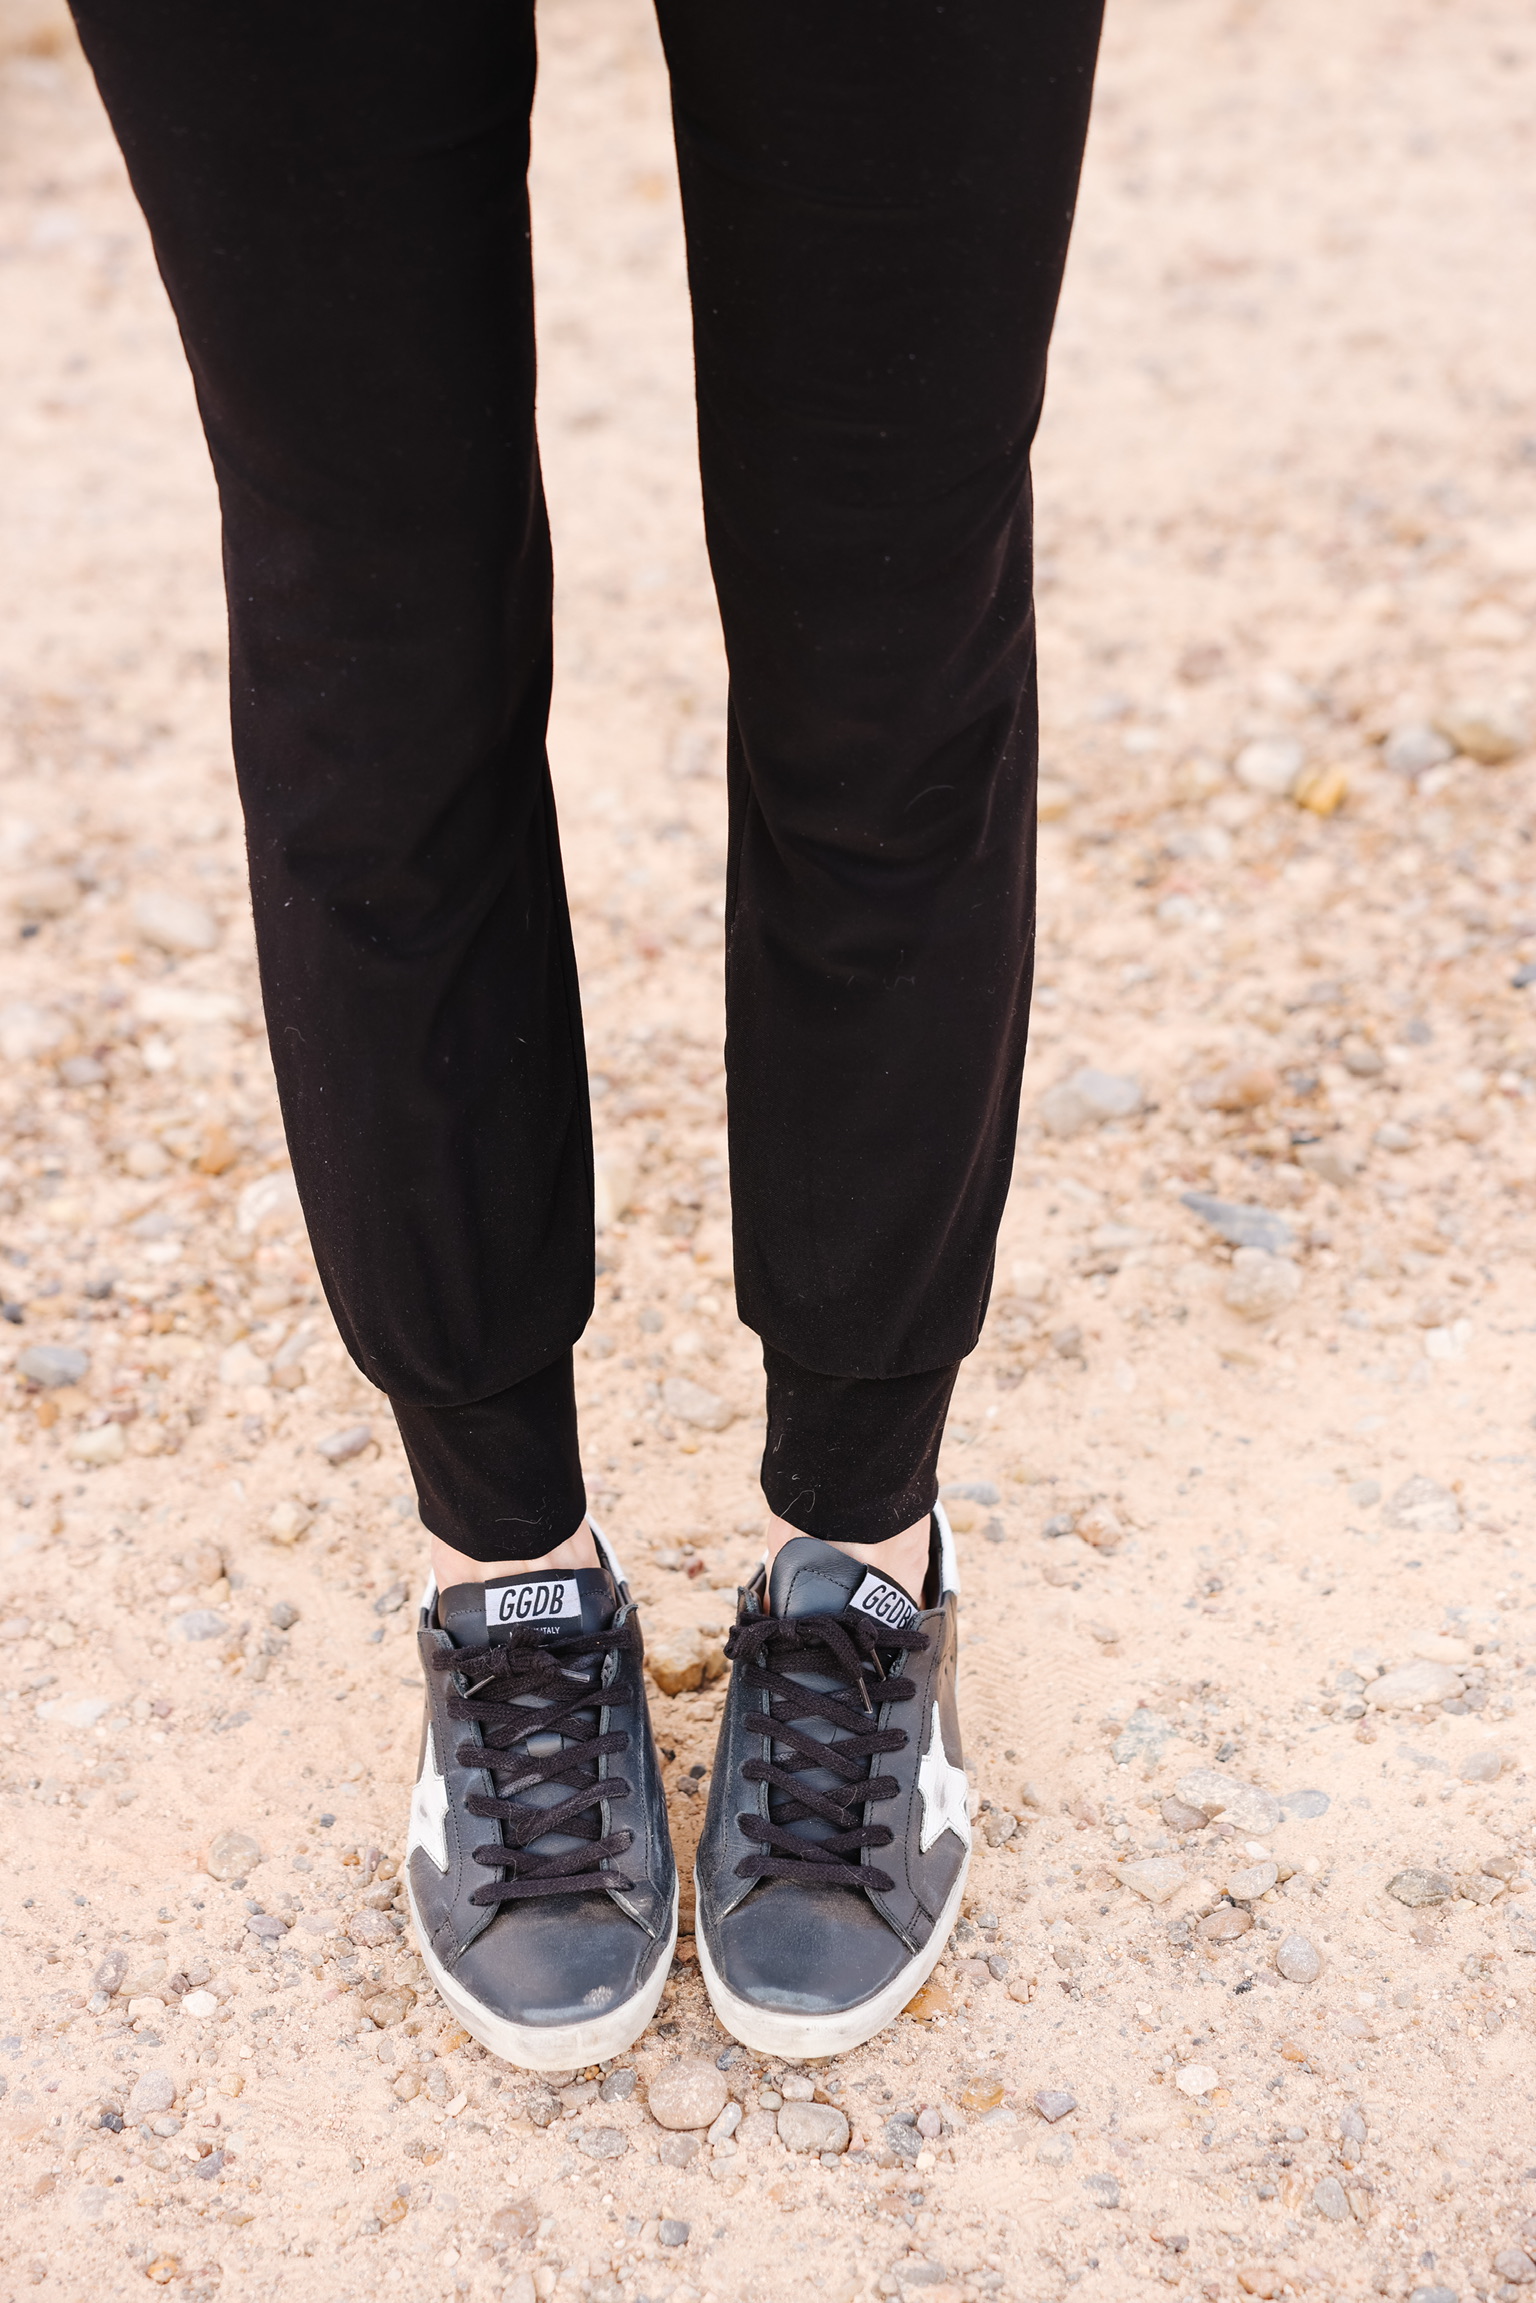 Elevated Basics, Erin Busbee of Busbee wearing black golden goose sneakers with black joggers by Norma Kamali in south texas, what shoes to wear with jeans